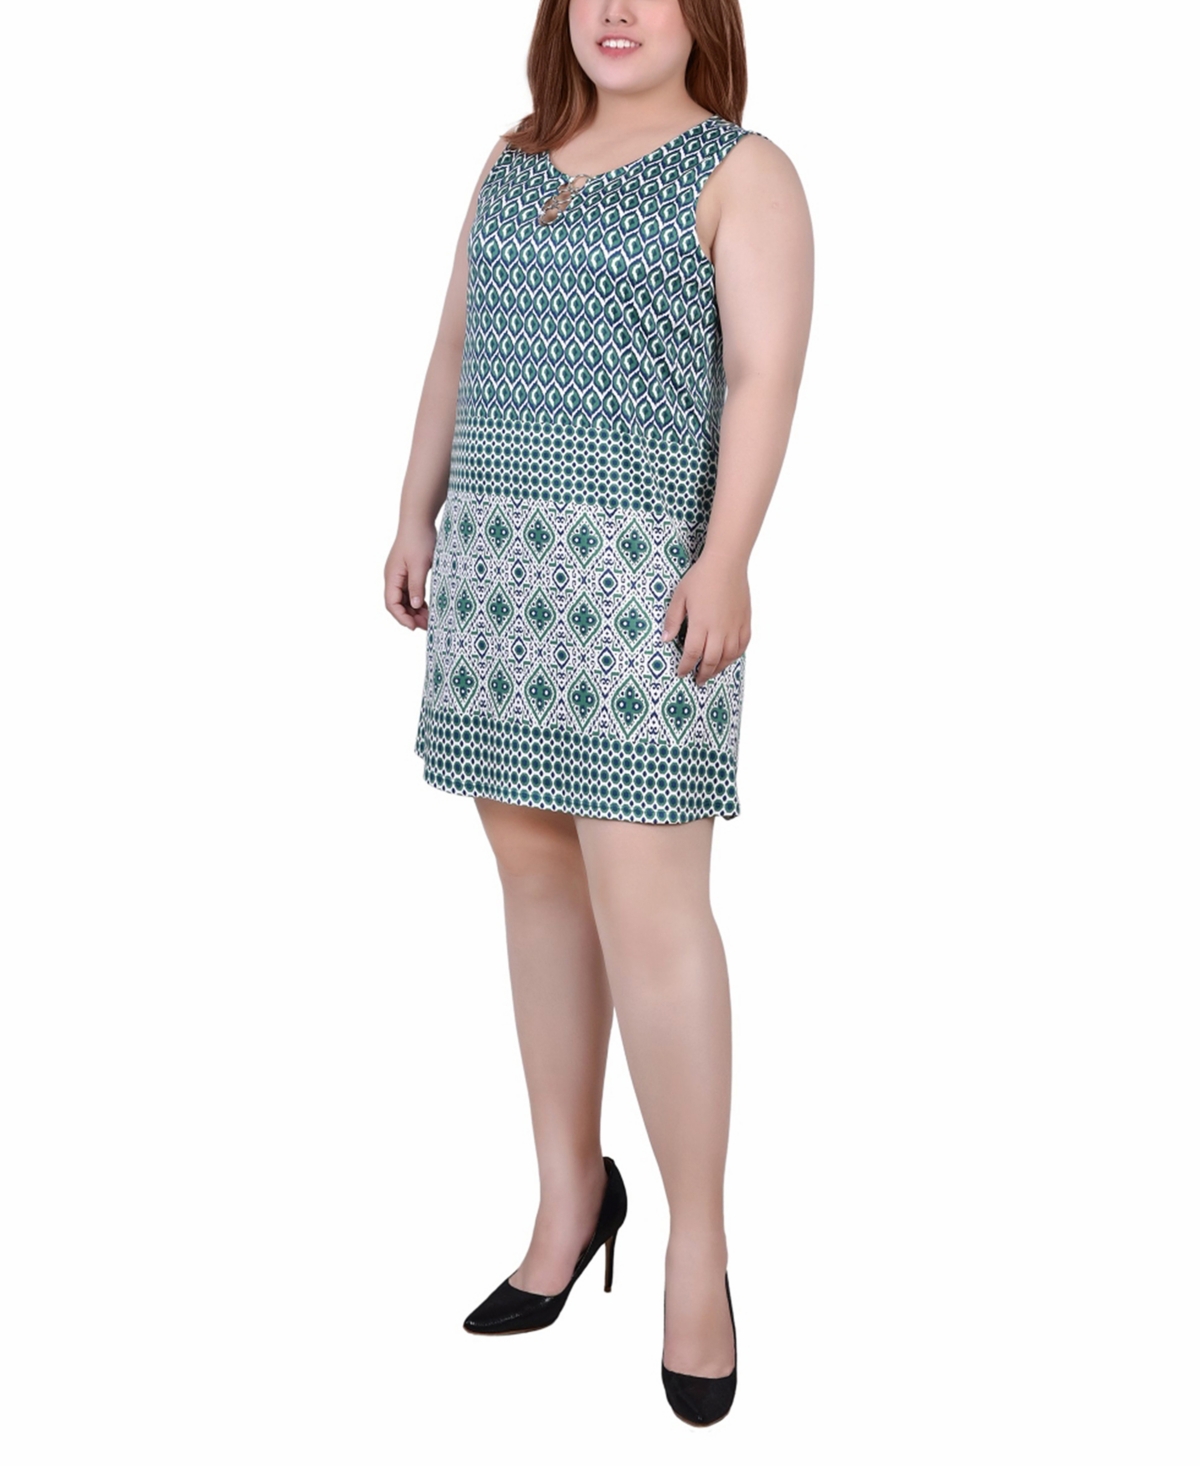 NY COLLECTION PLUS SIZE SLEEVELESS DRESS WITH 3 RINGS